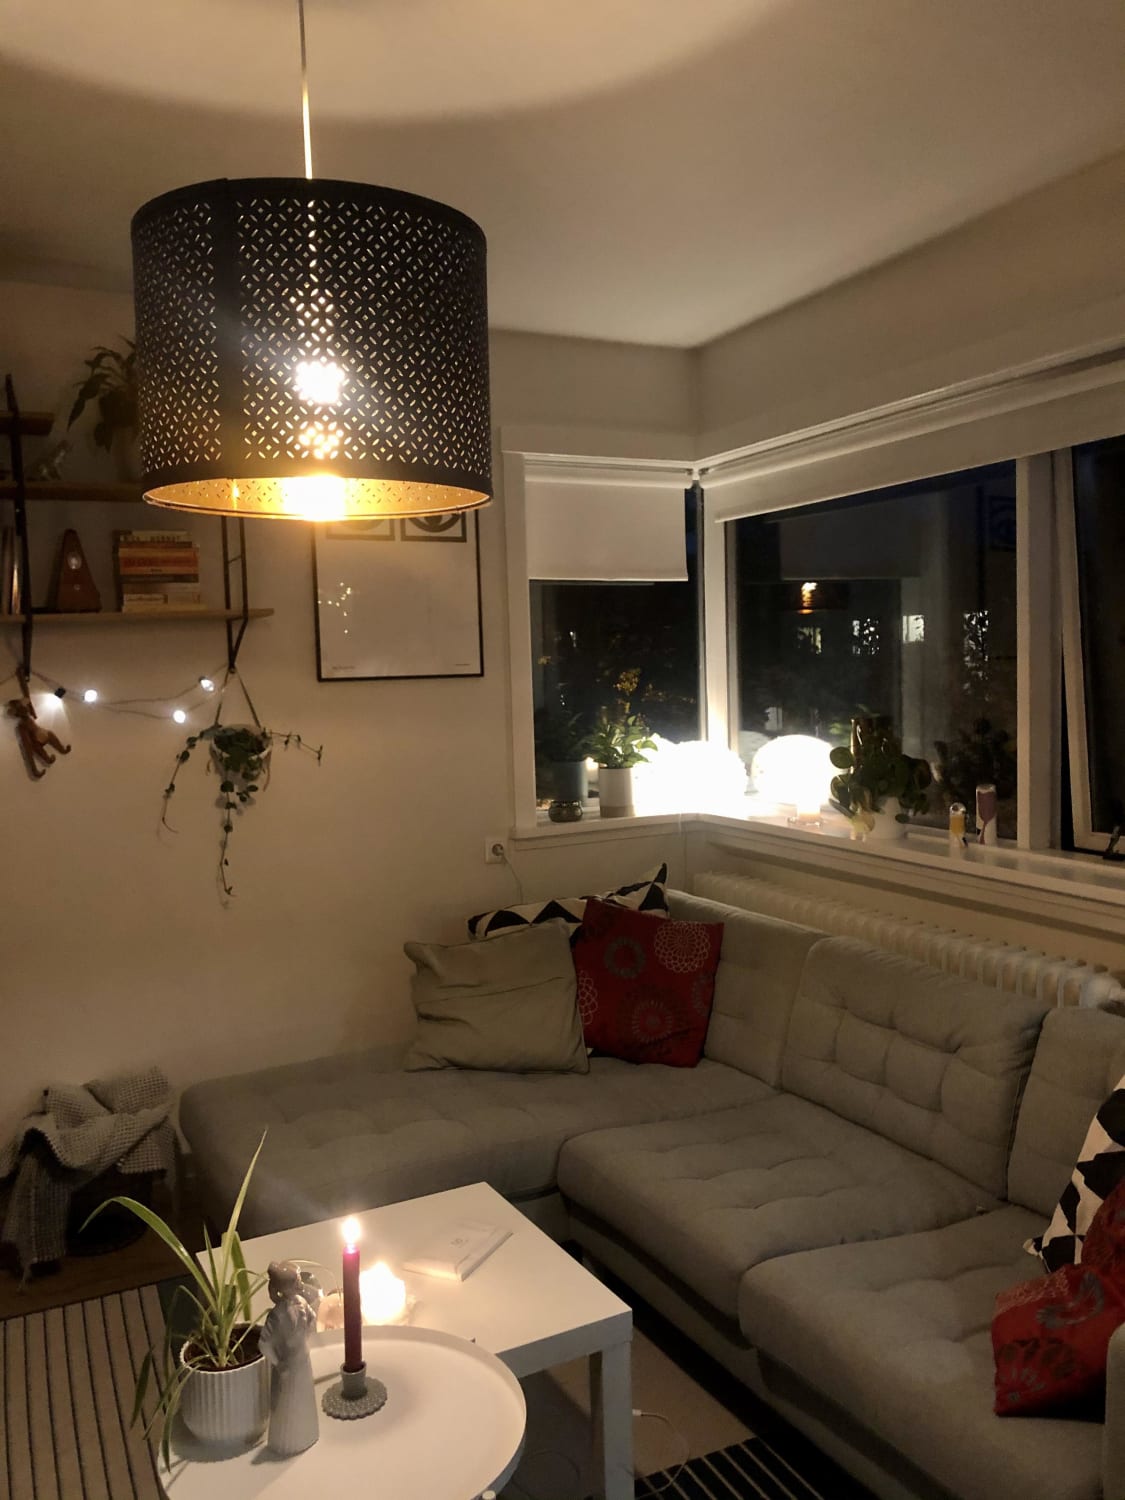 [INT] [DIY] These days it feels like I sleep more on the couch than in my bed. Also, love twilight season with low lights and candles everywhere.